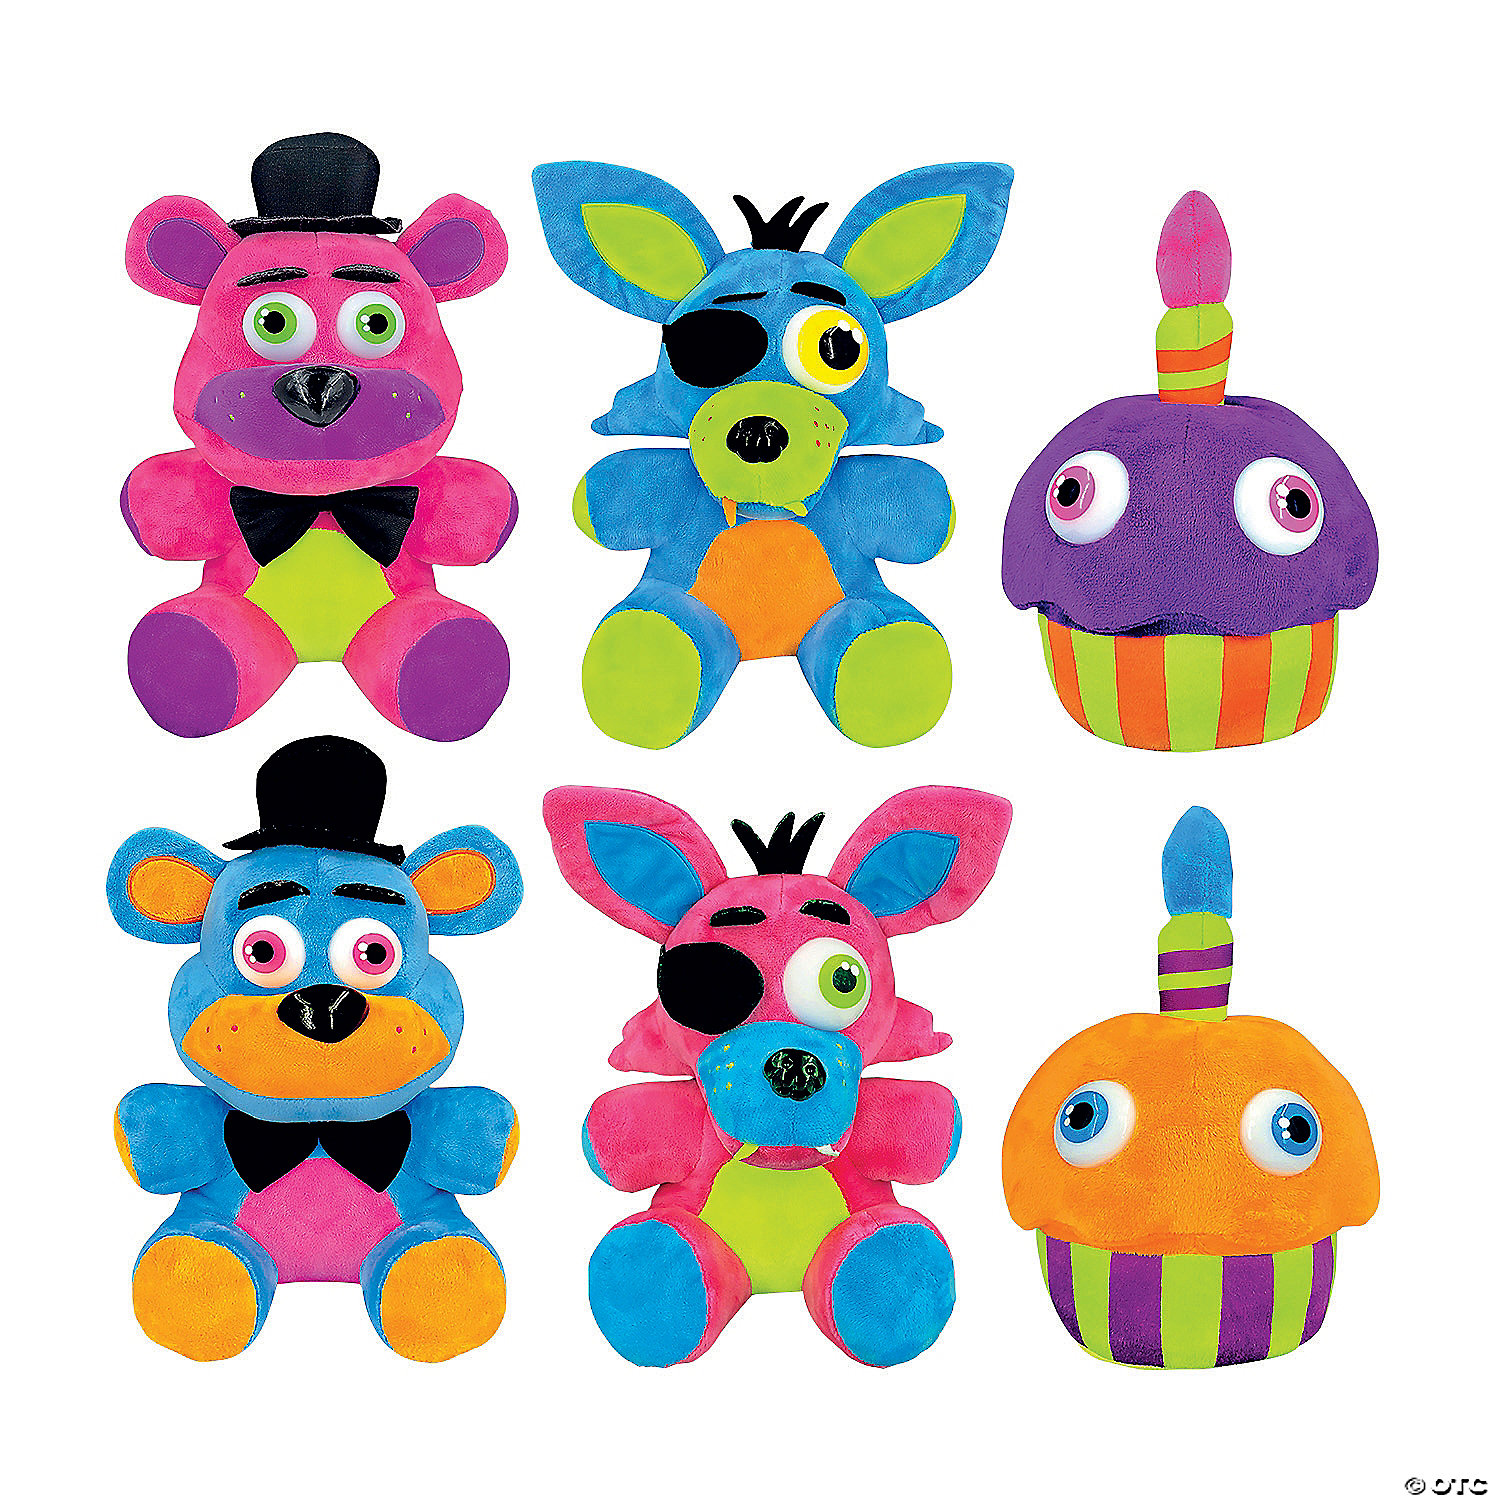 Five Nights at Freddy's 6.5 Plush Set of 4 (Bonnie, Foxy, Freddy, and  Chica) 